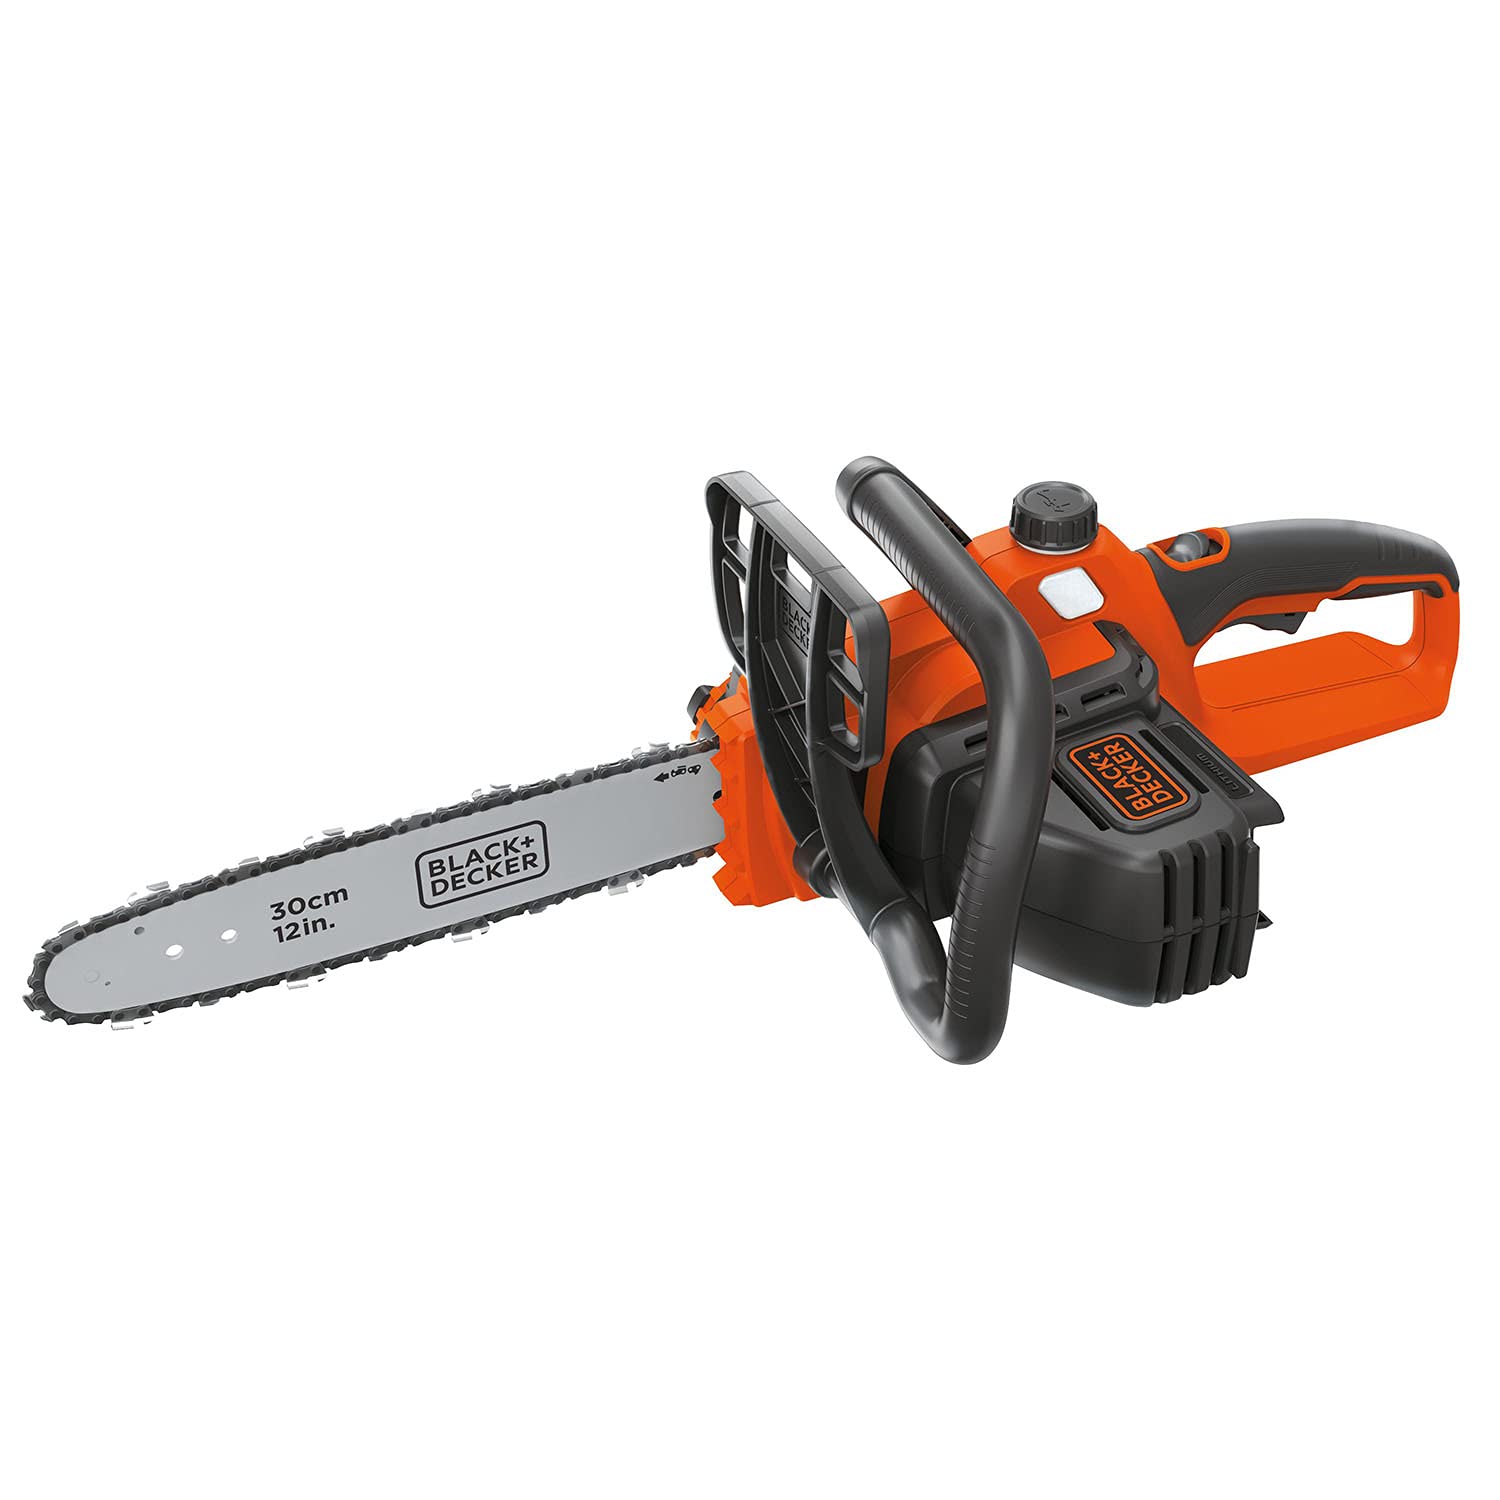 BLACK+DECKER 40V Max Cordless Chainsaw, 12" - $99.99 - Free shipping for Prime members - $100